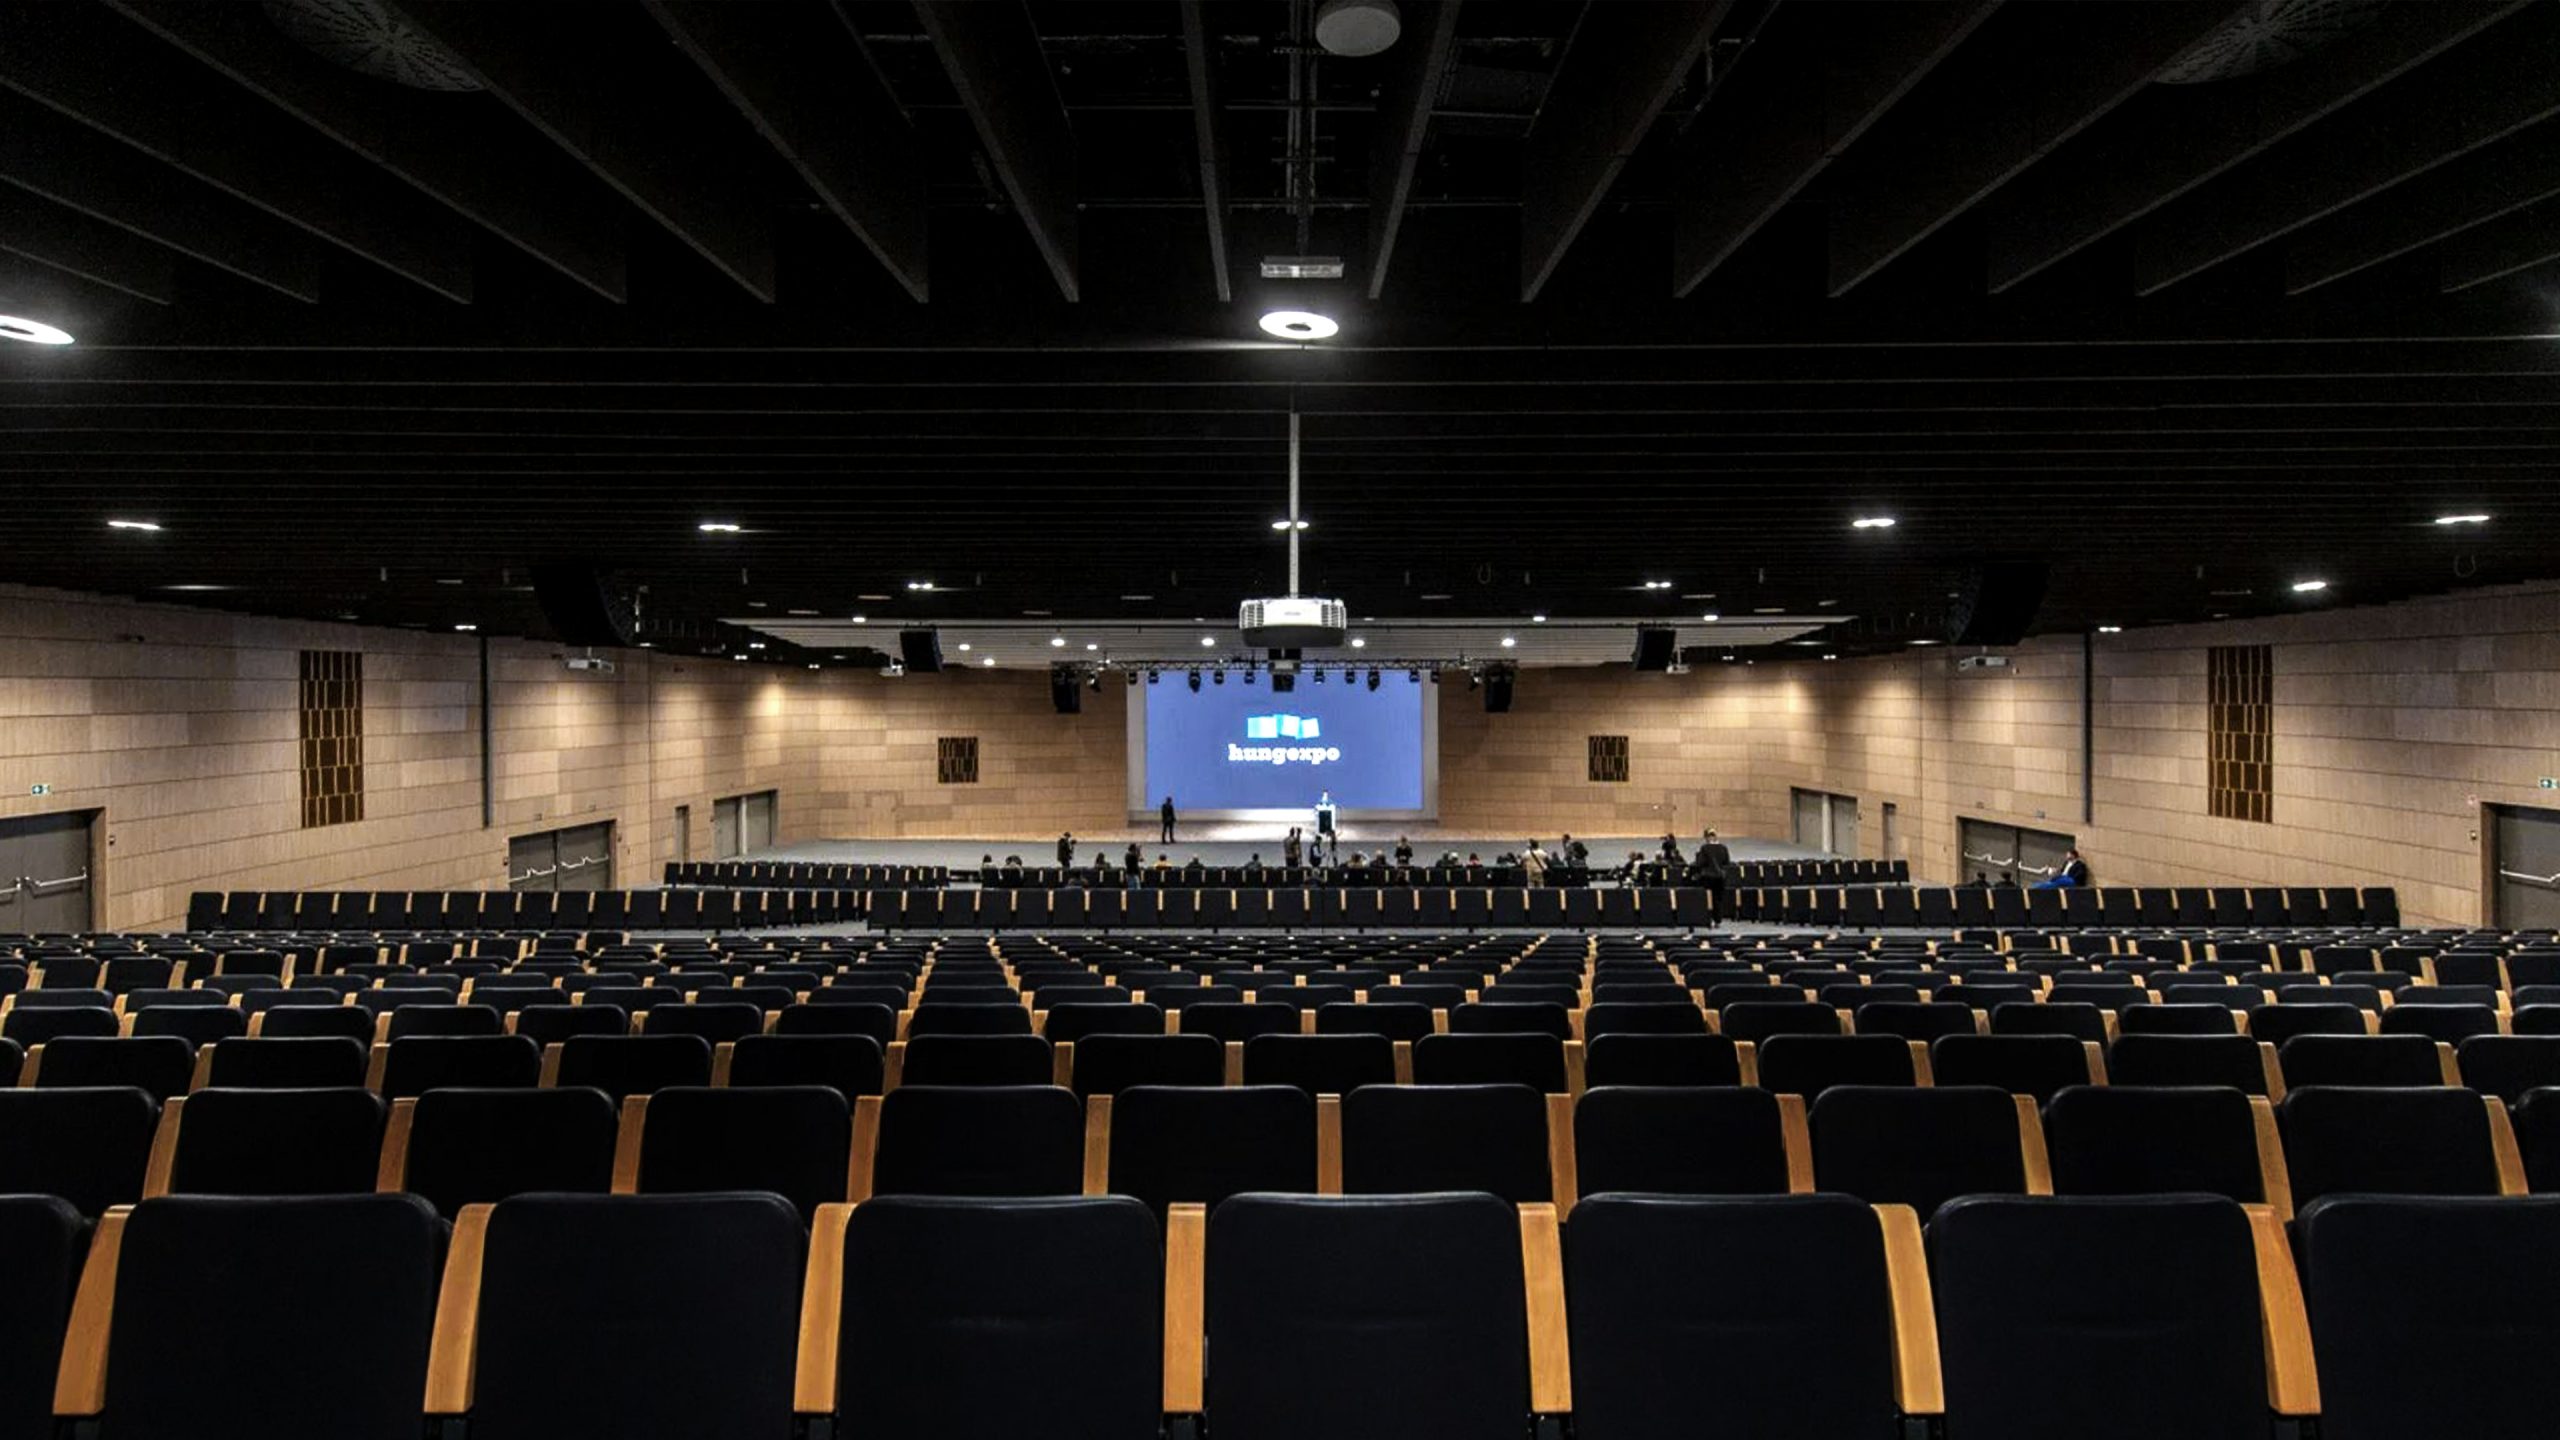 2000-seat plenary hall. Gala seating can be easily and time-efficiently adapted.